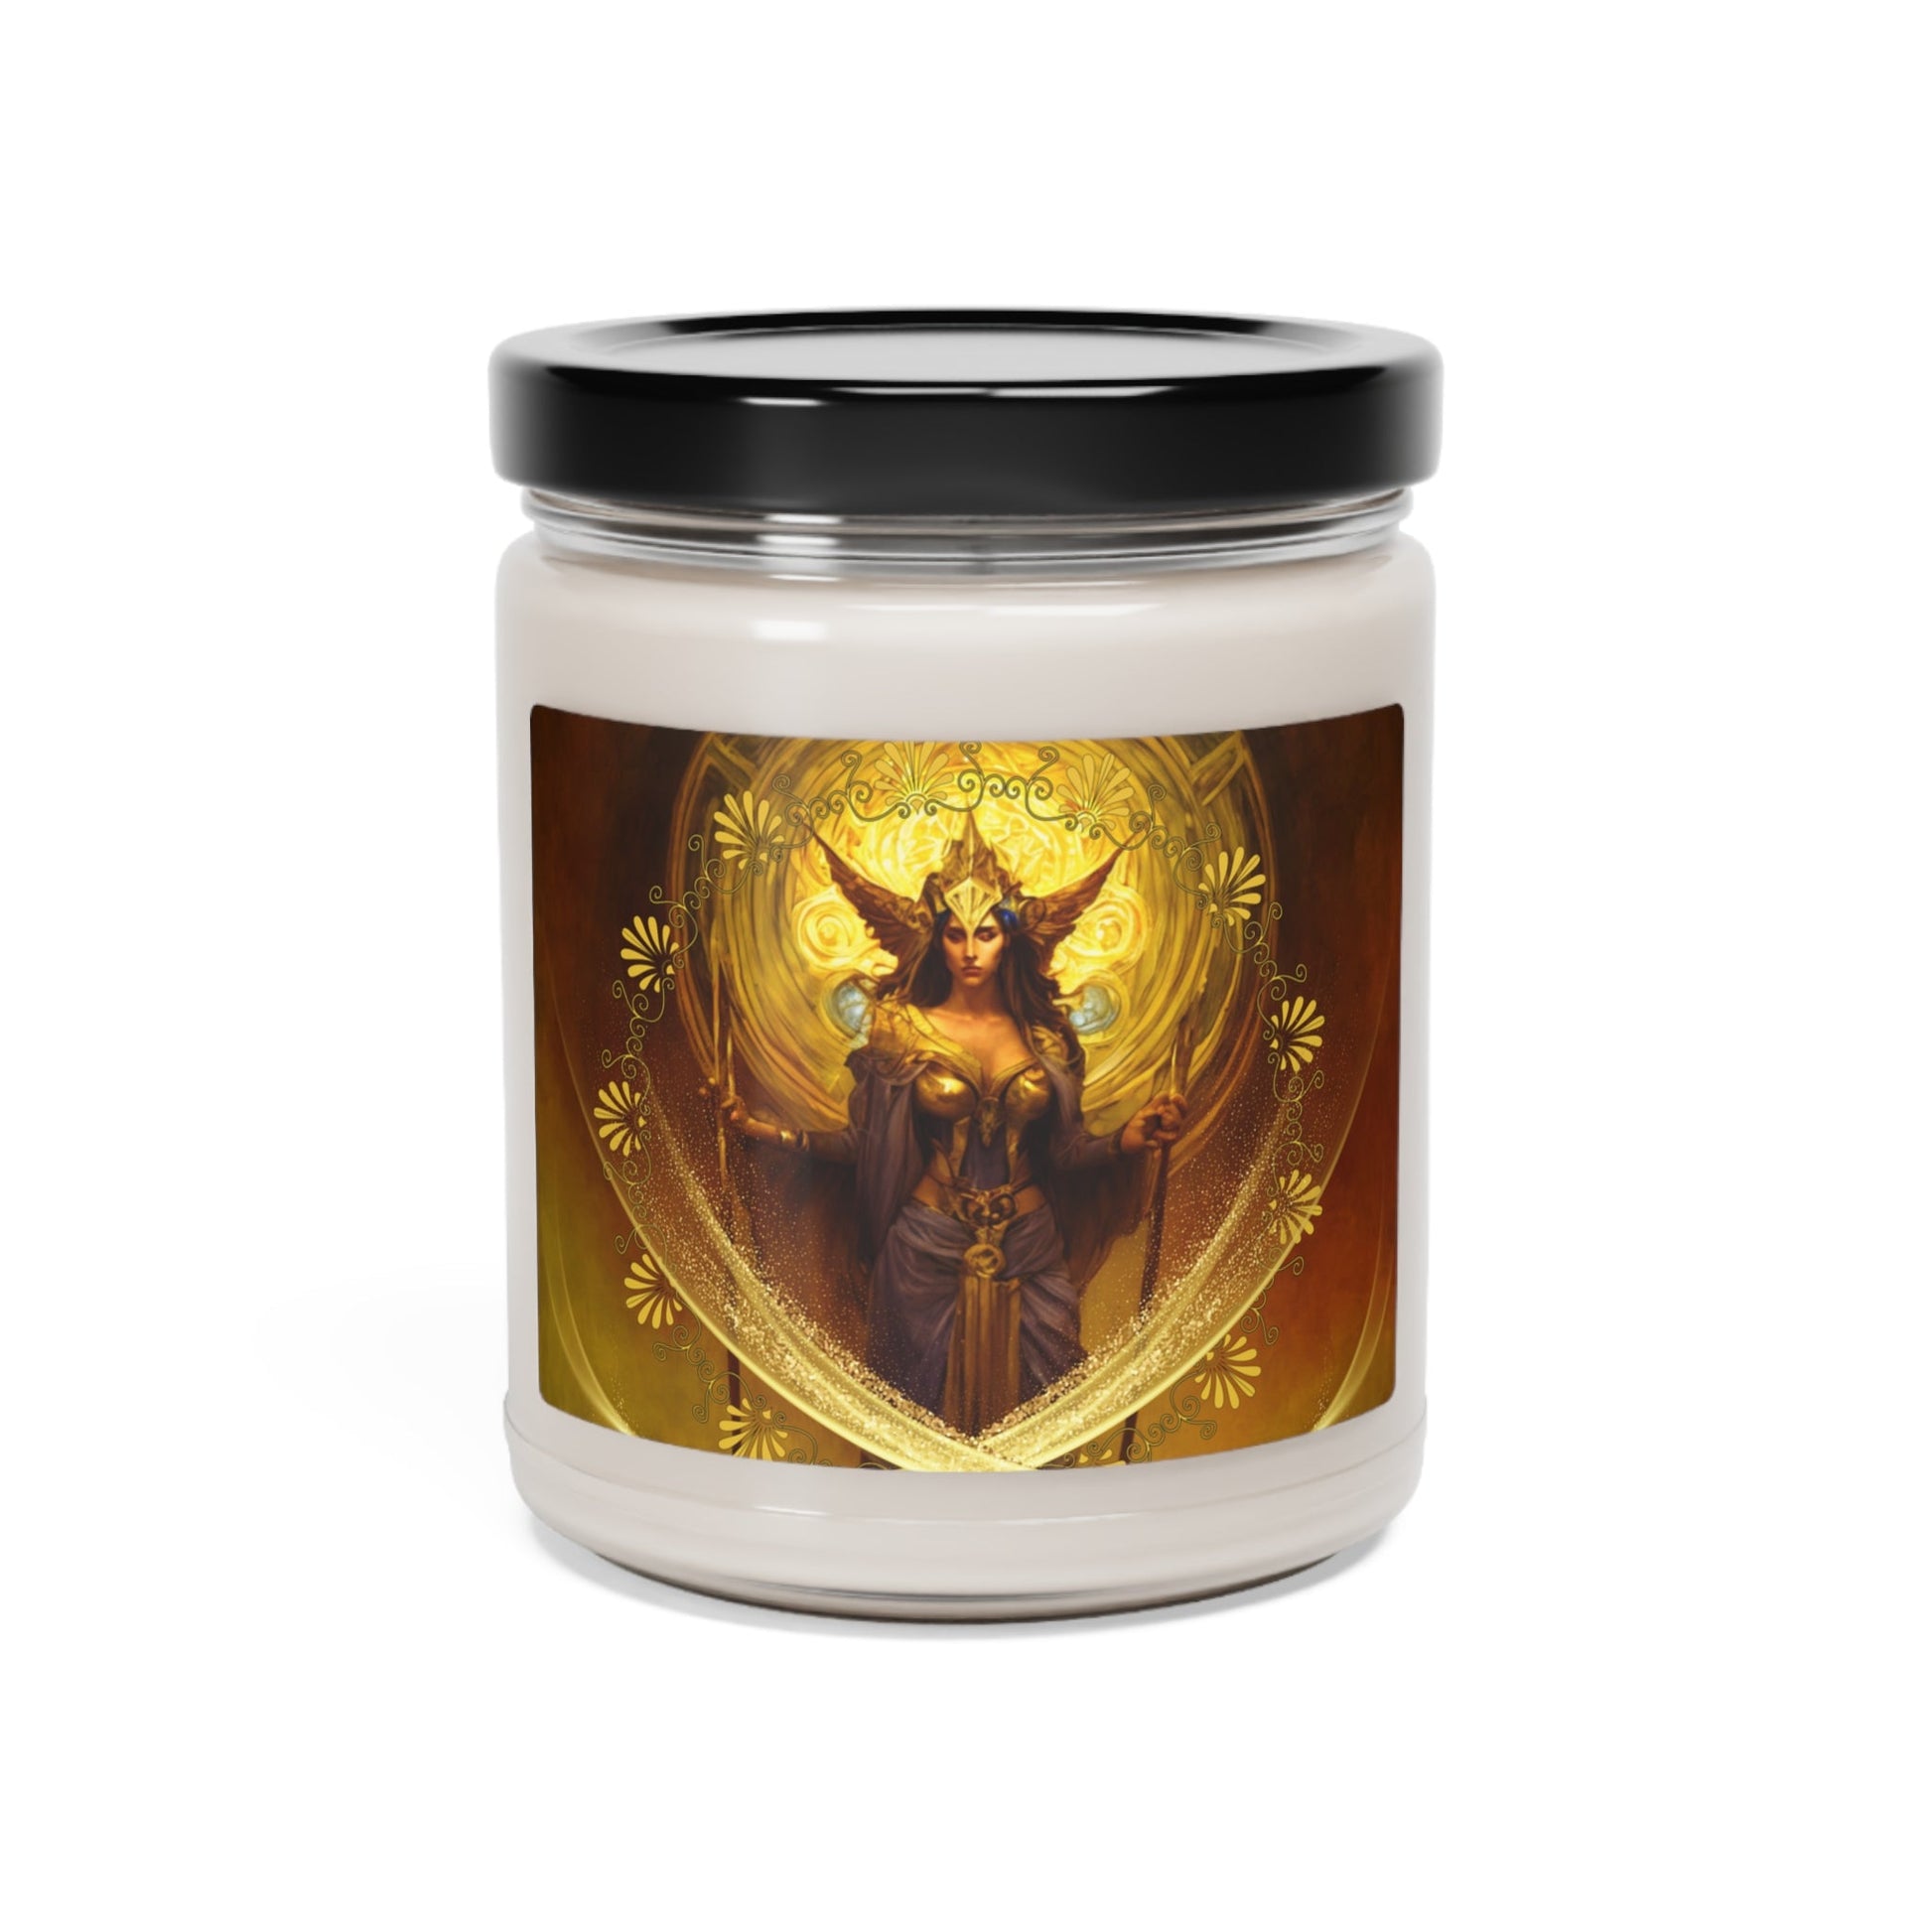 Goddess-Hecate-Scented-Soy-Candle-for-offerings-rituals-initiations-or-praying-and-meditation-16